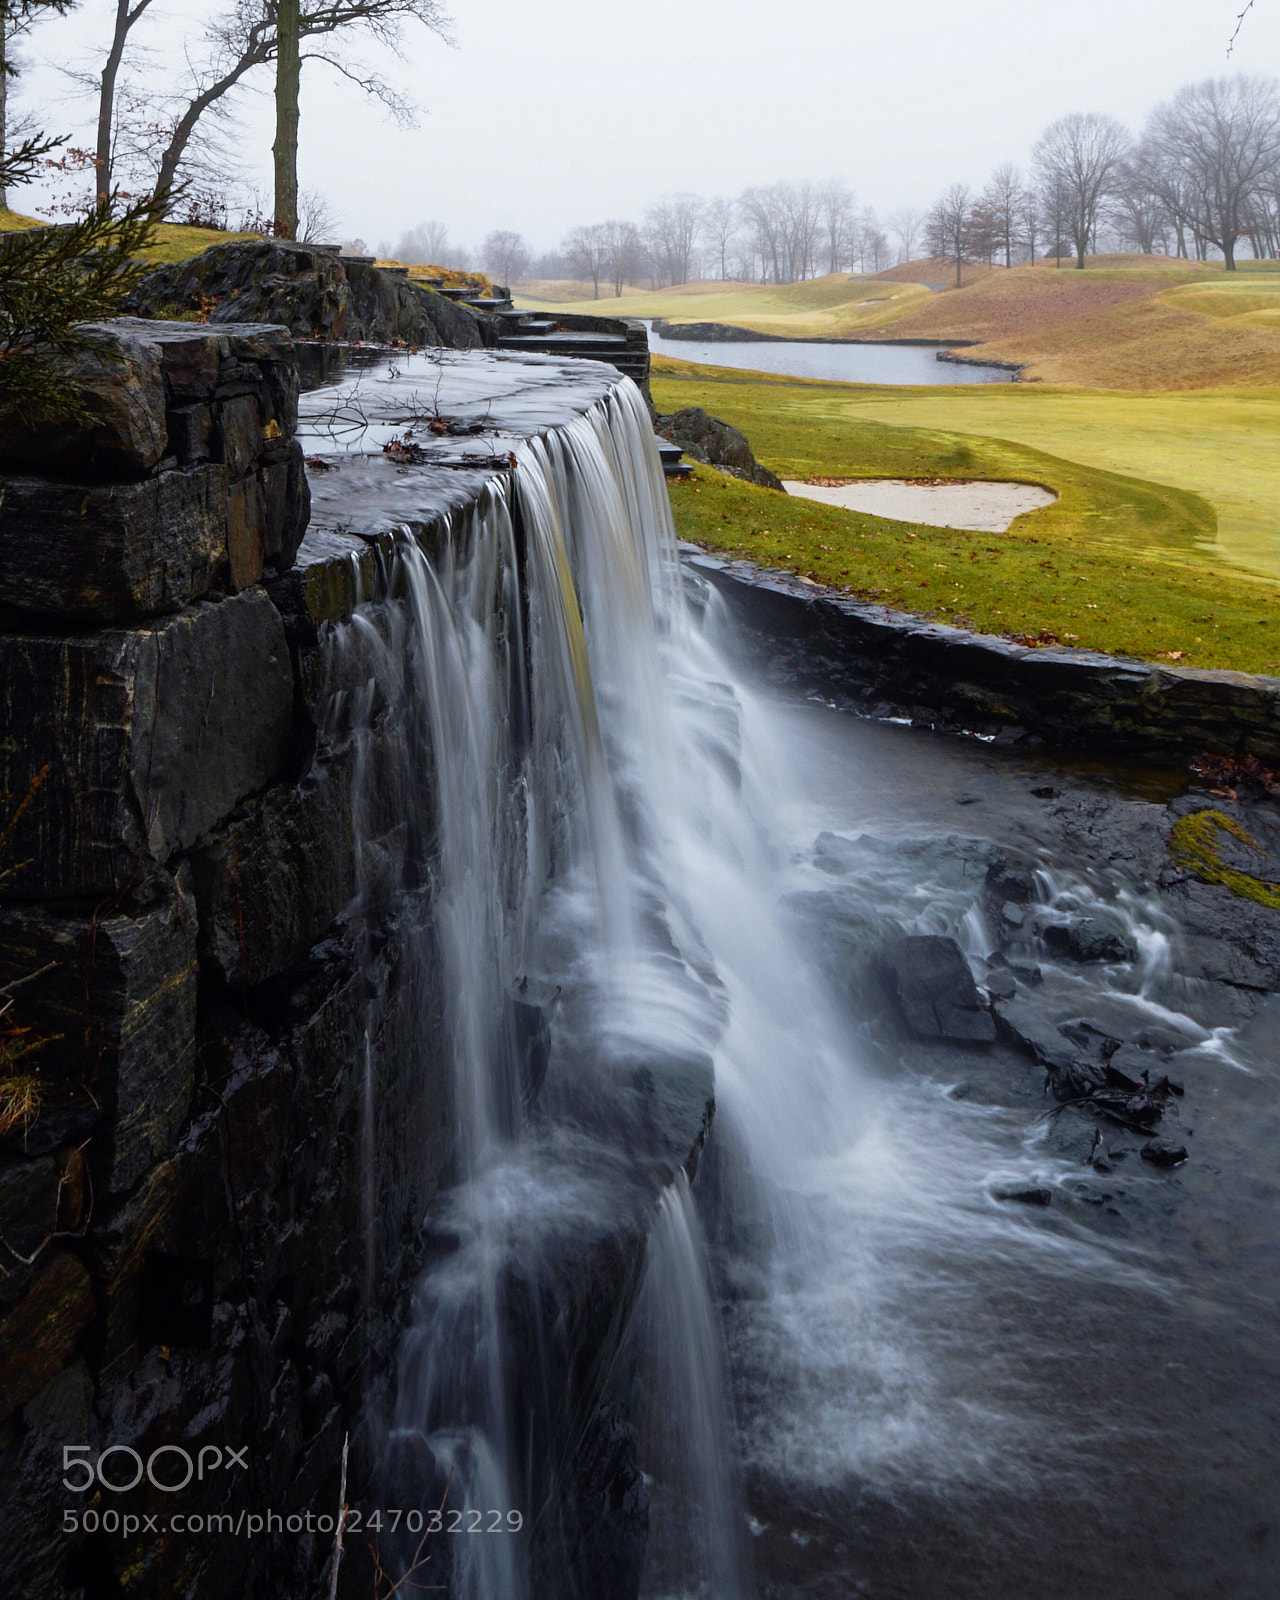 Sony a6300 sample photo. Golf courses and waterfalls photography